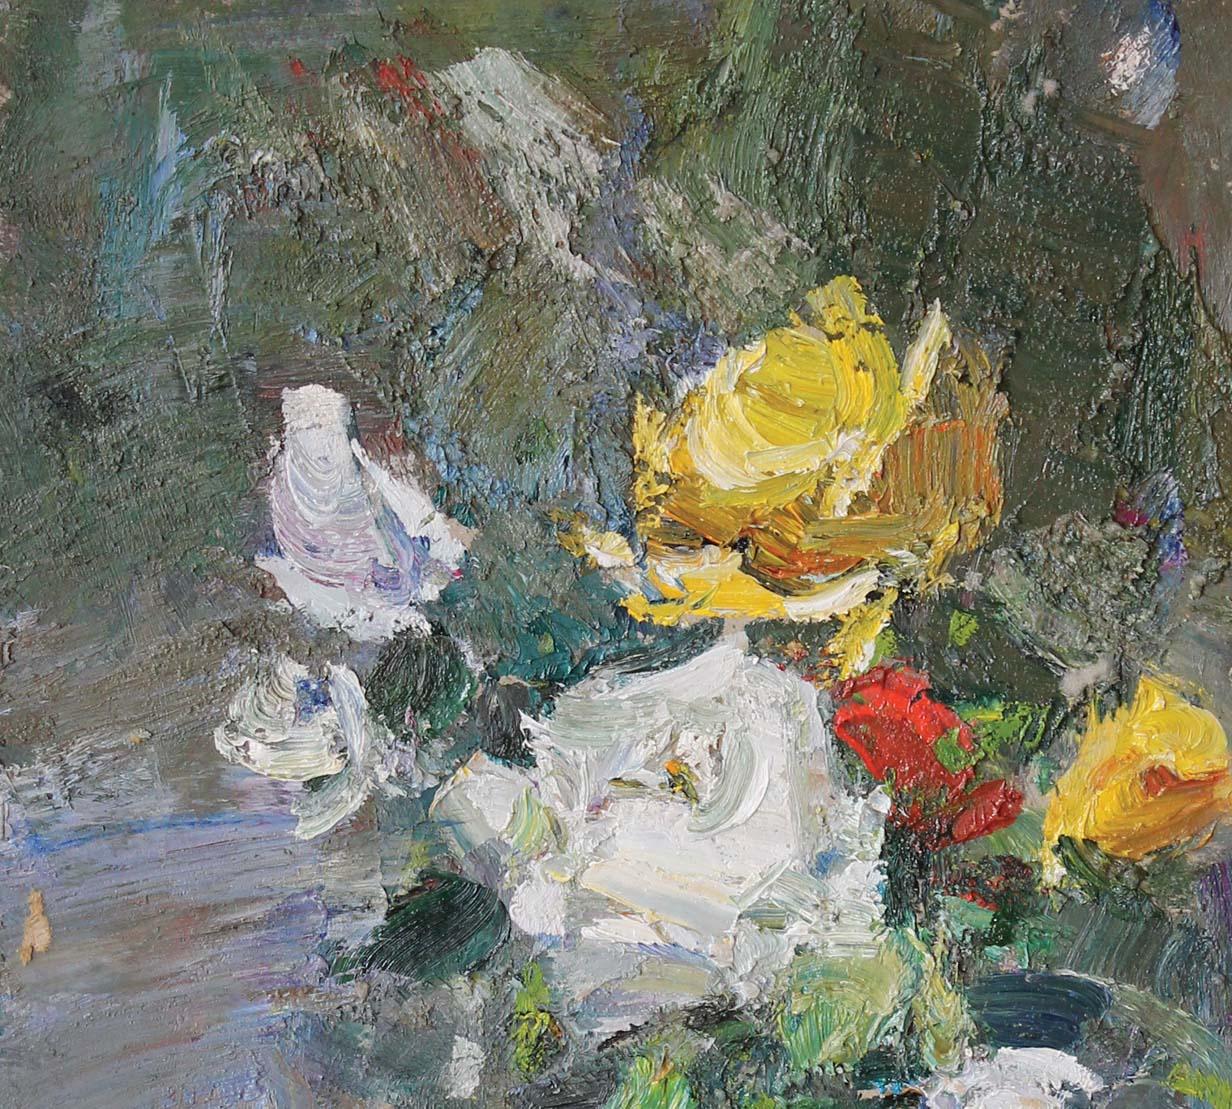 Roses - Painting by Andrey Inozemtsev